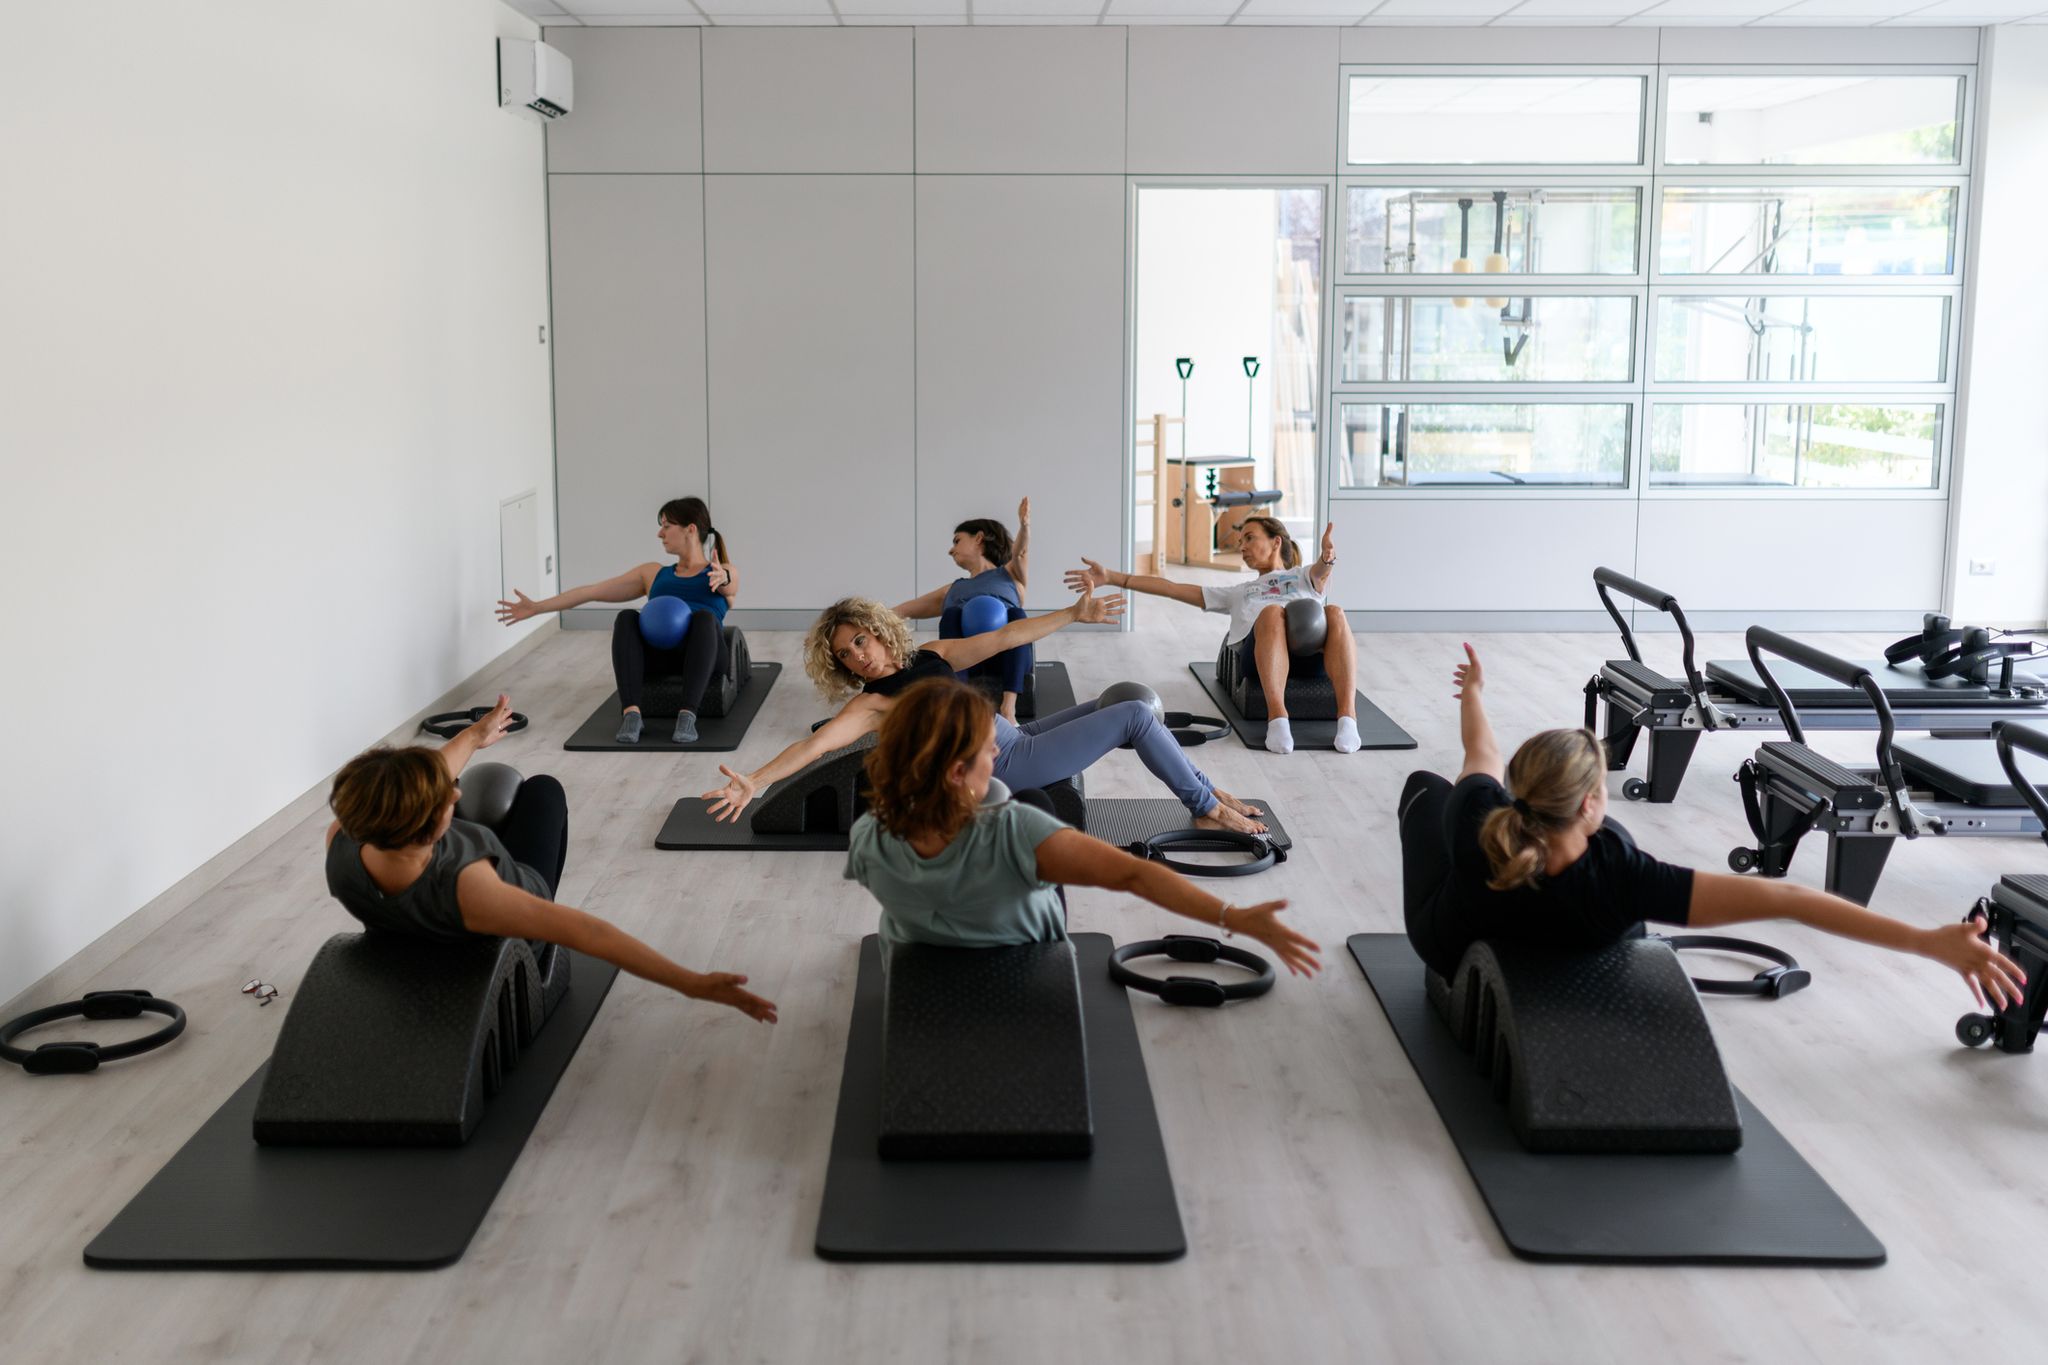 Club Pilates - Who comes to Pilates class for feet in Straps